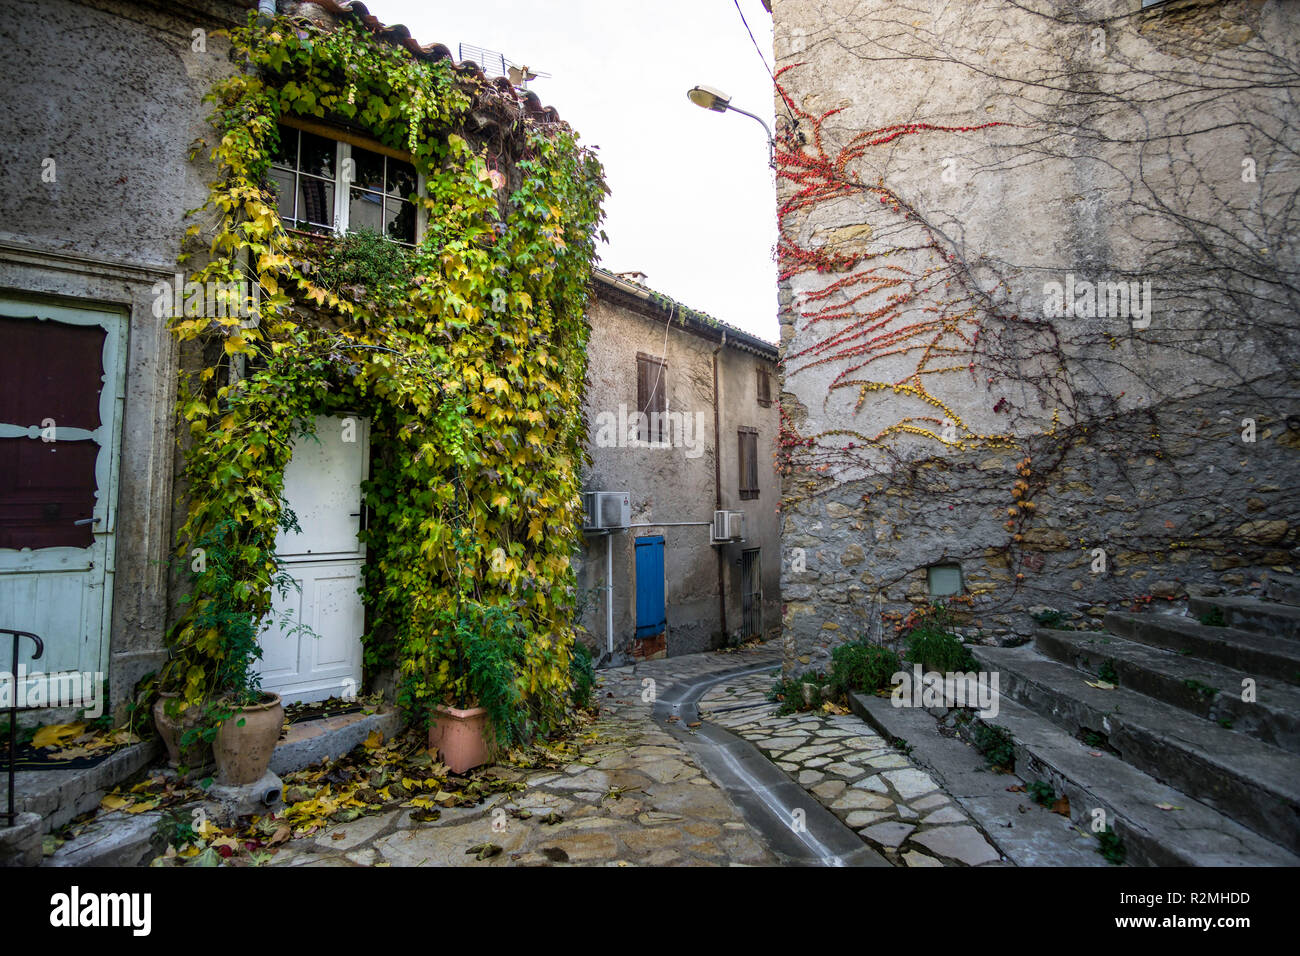 House entrance surrounded by autumnal grapevine in the village center Stock Photo